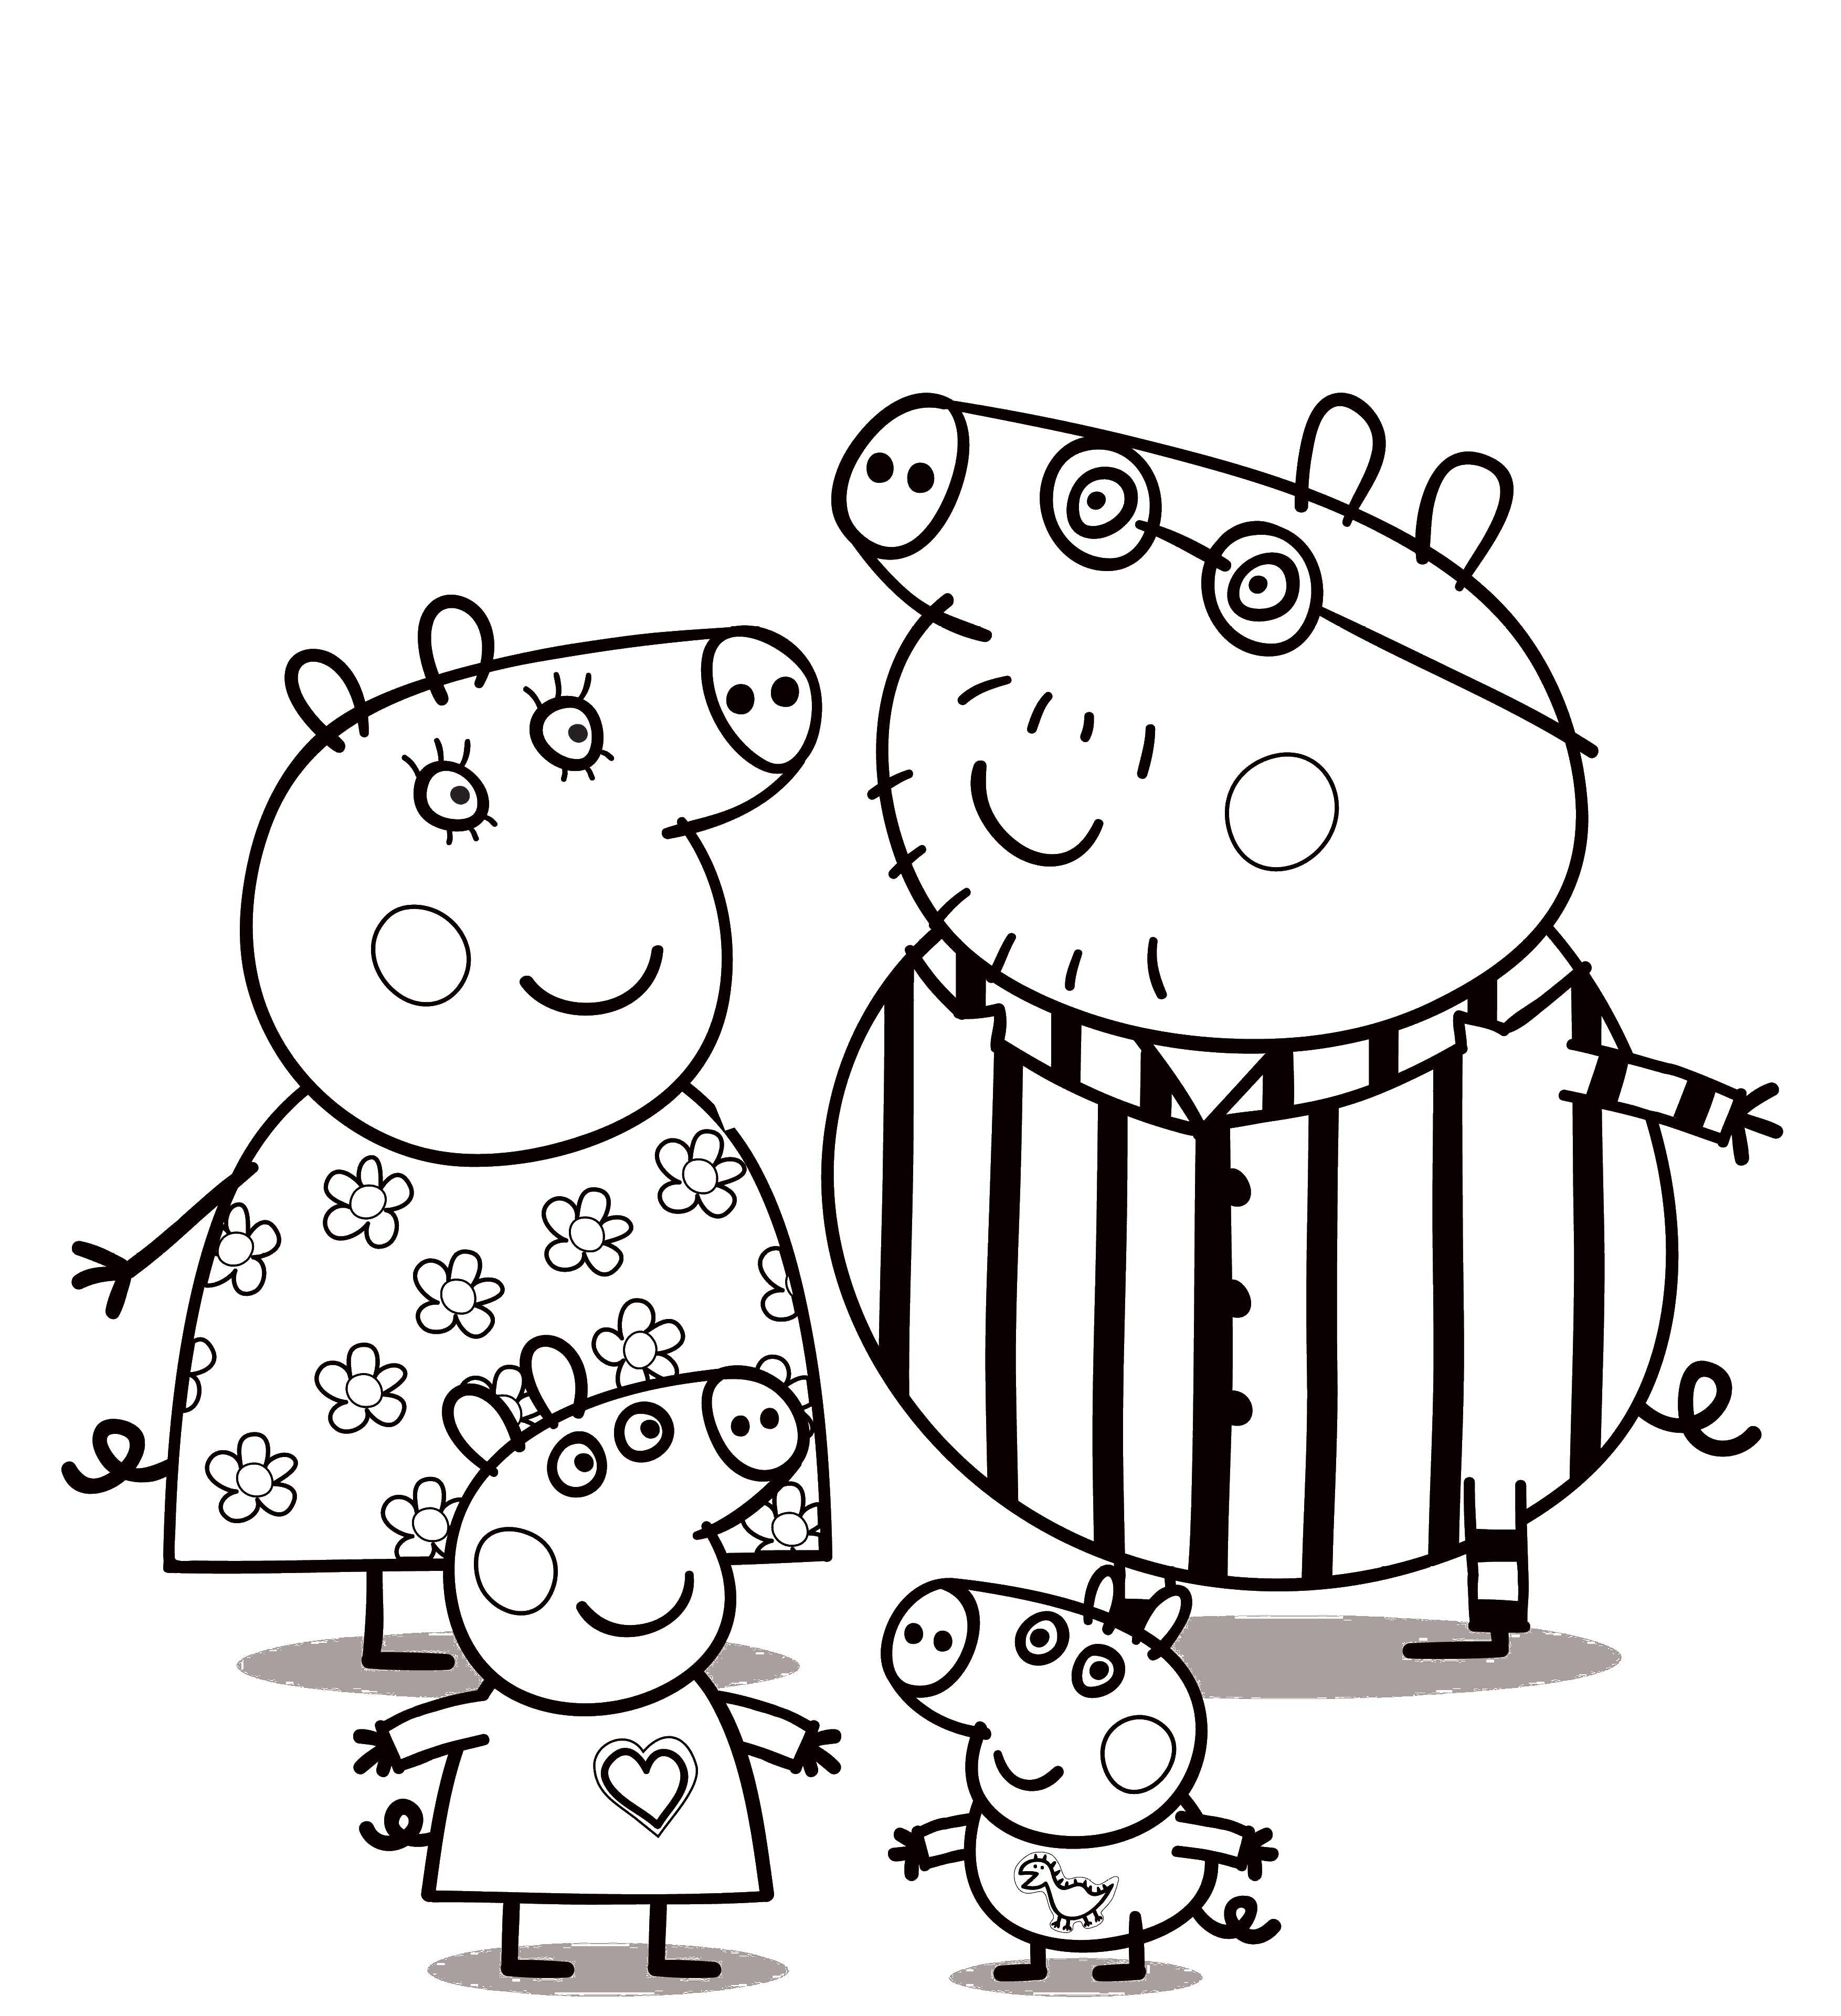 Coloring Family in peppa. Category Family. Tags:  Family, parents, children.